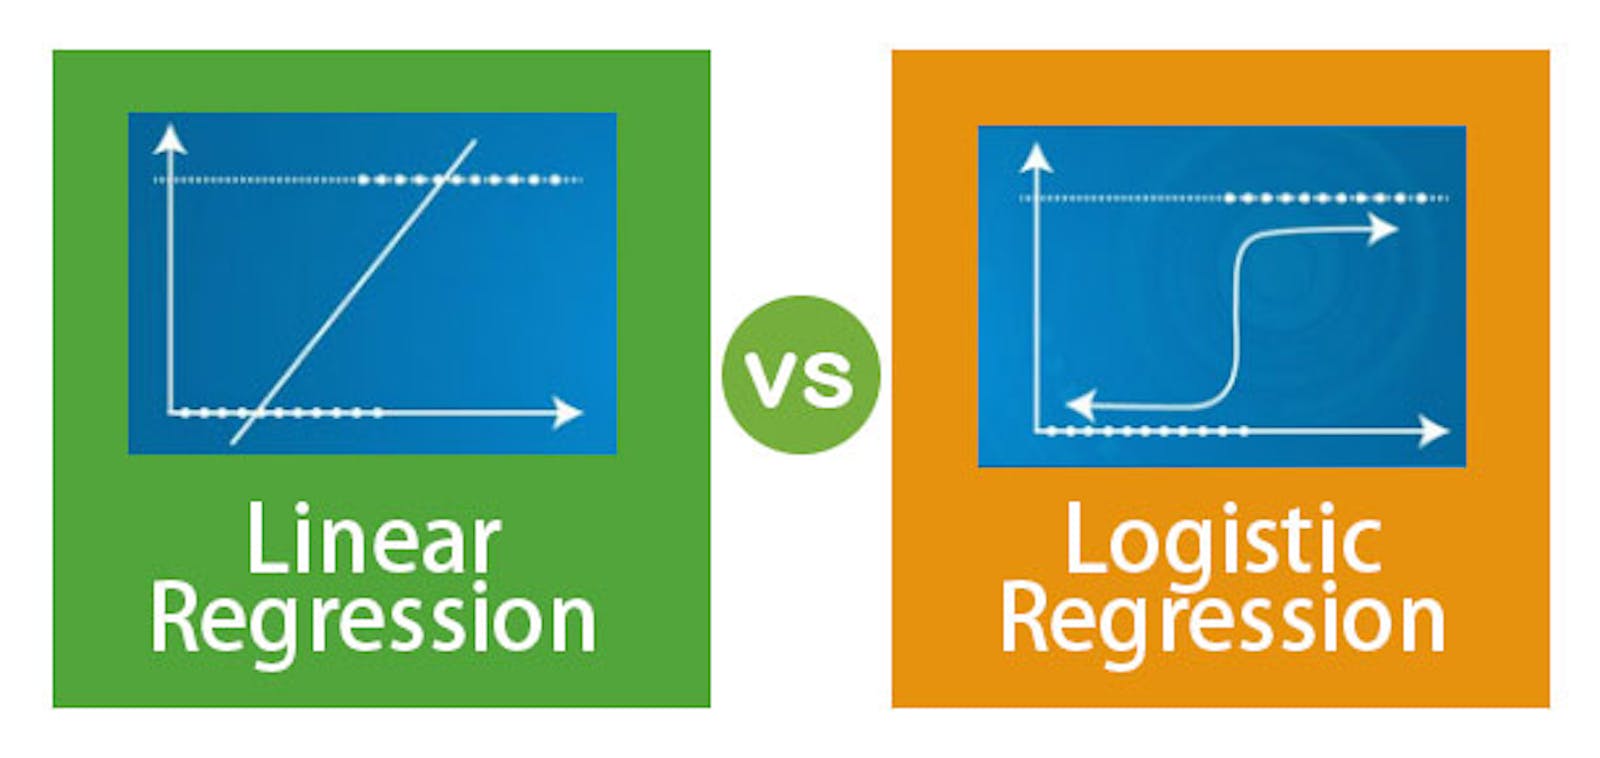 The difference between linear regression and logistic regression